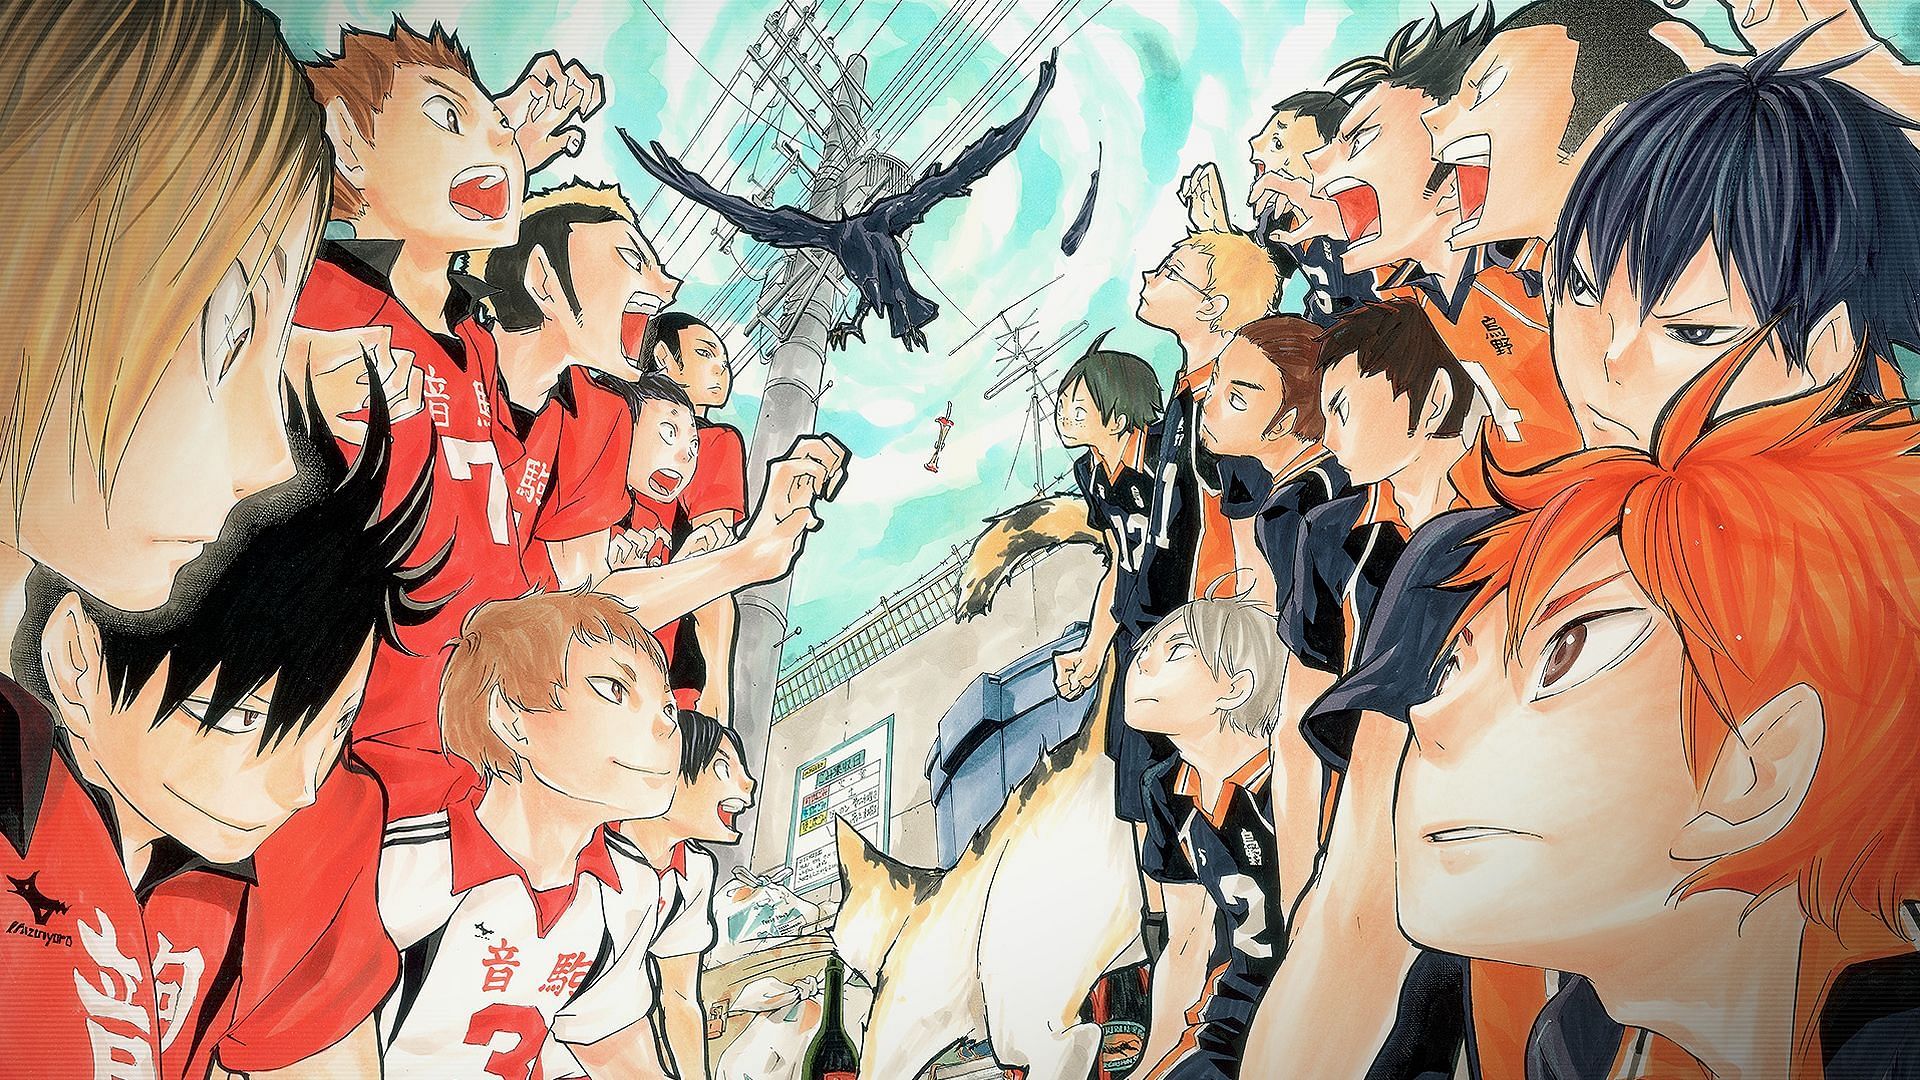 Anime Senpai  Haikyuu upcoming movies are titled Haikyuu Final which  will cover the remaining story of the manga 110 manga chapters are left to  be adapted After 2 films there wont